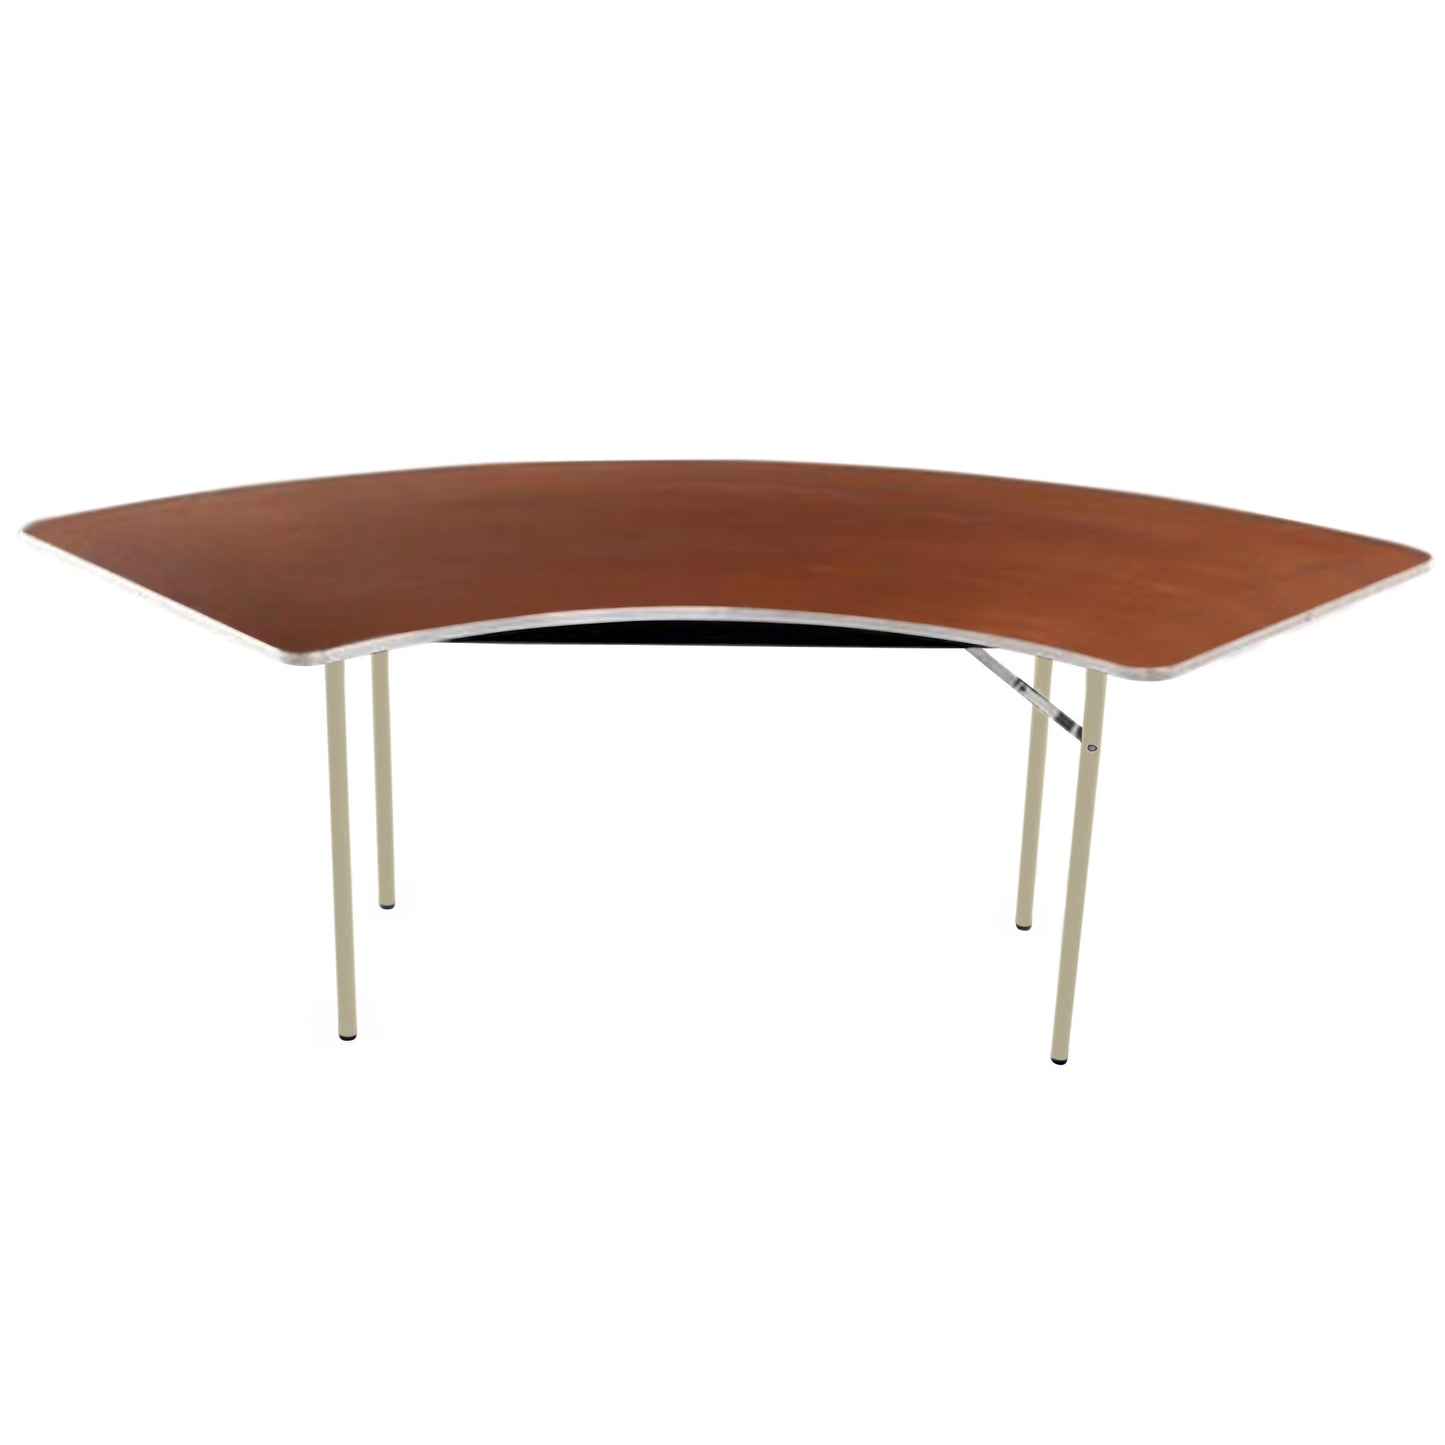 AmTab Folding Table - Plywood Stained and Sealed - Aluminum Edge - Serpentine - 30"W x 42,72"L x 29"H  (AmTab AMT-SE306PA)